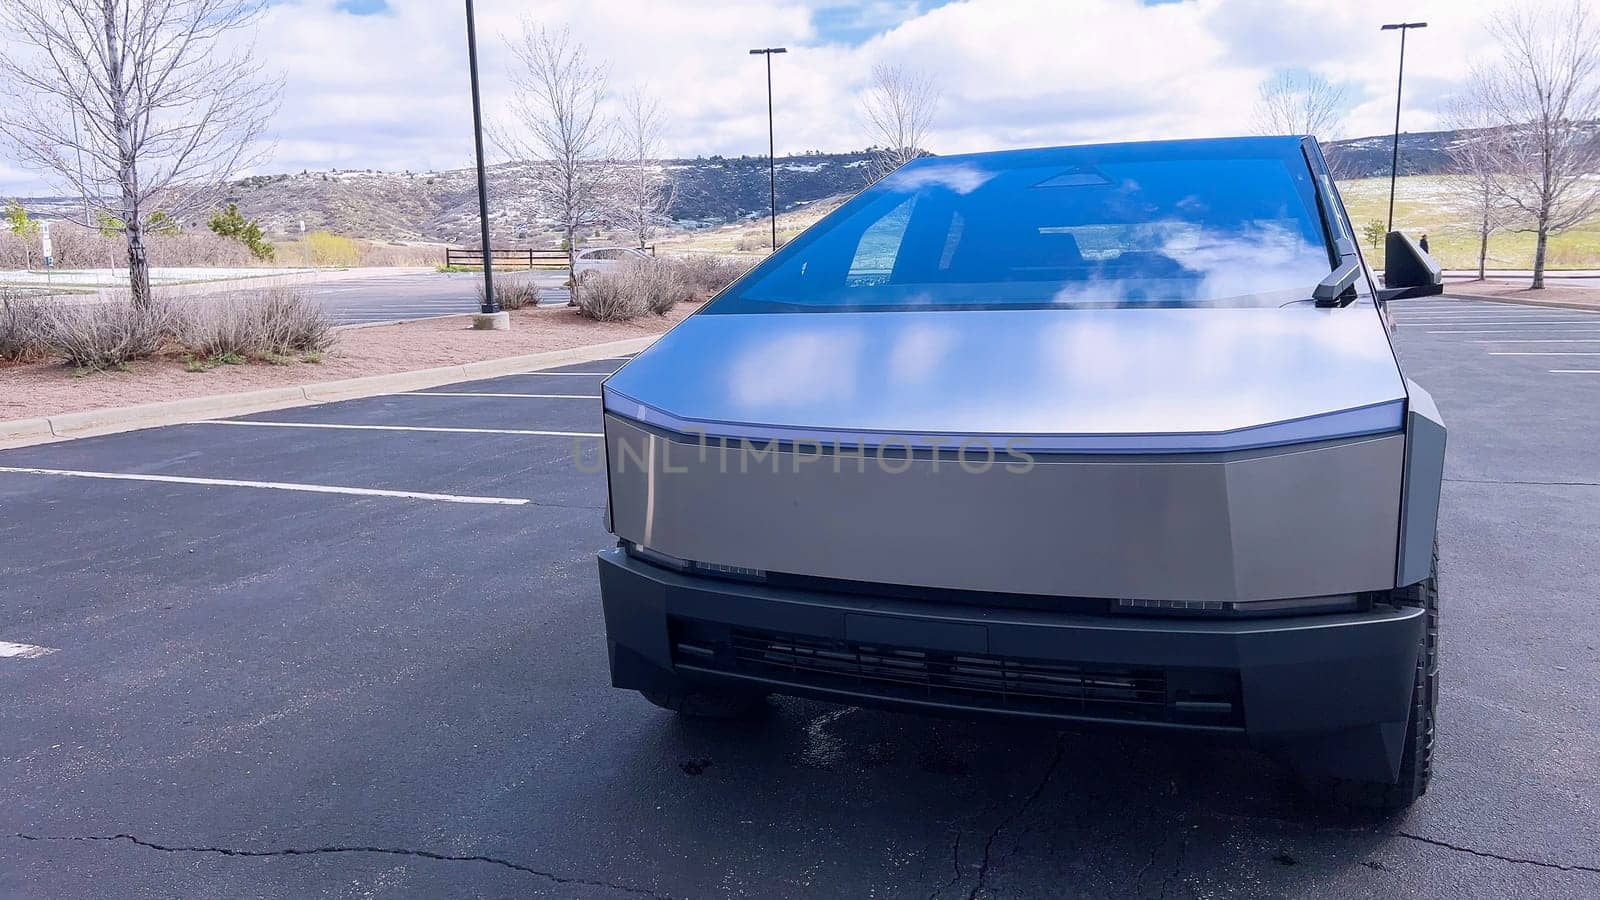 Front View of a Tesla Cybertruck in an Outdoor Parking Lot by arinahabich